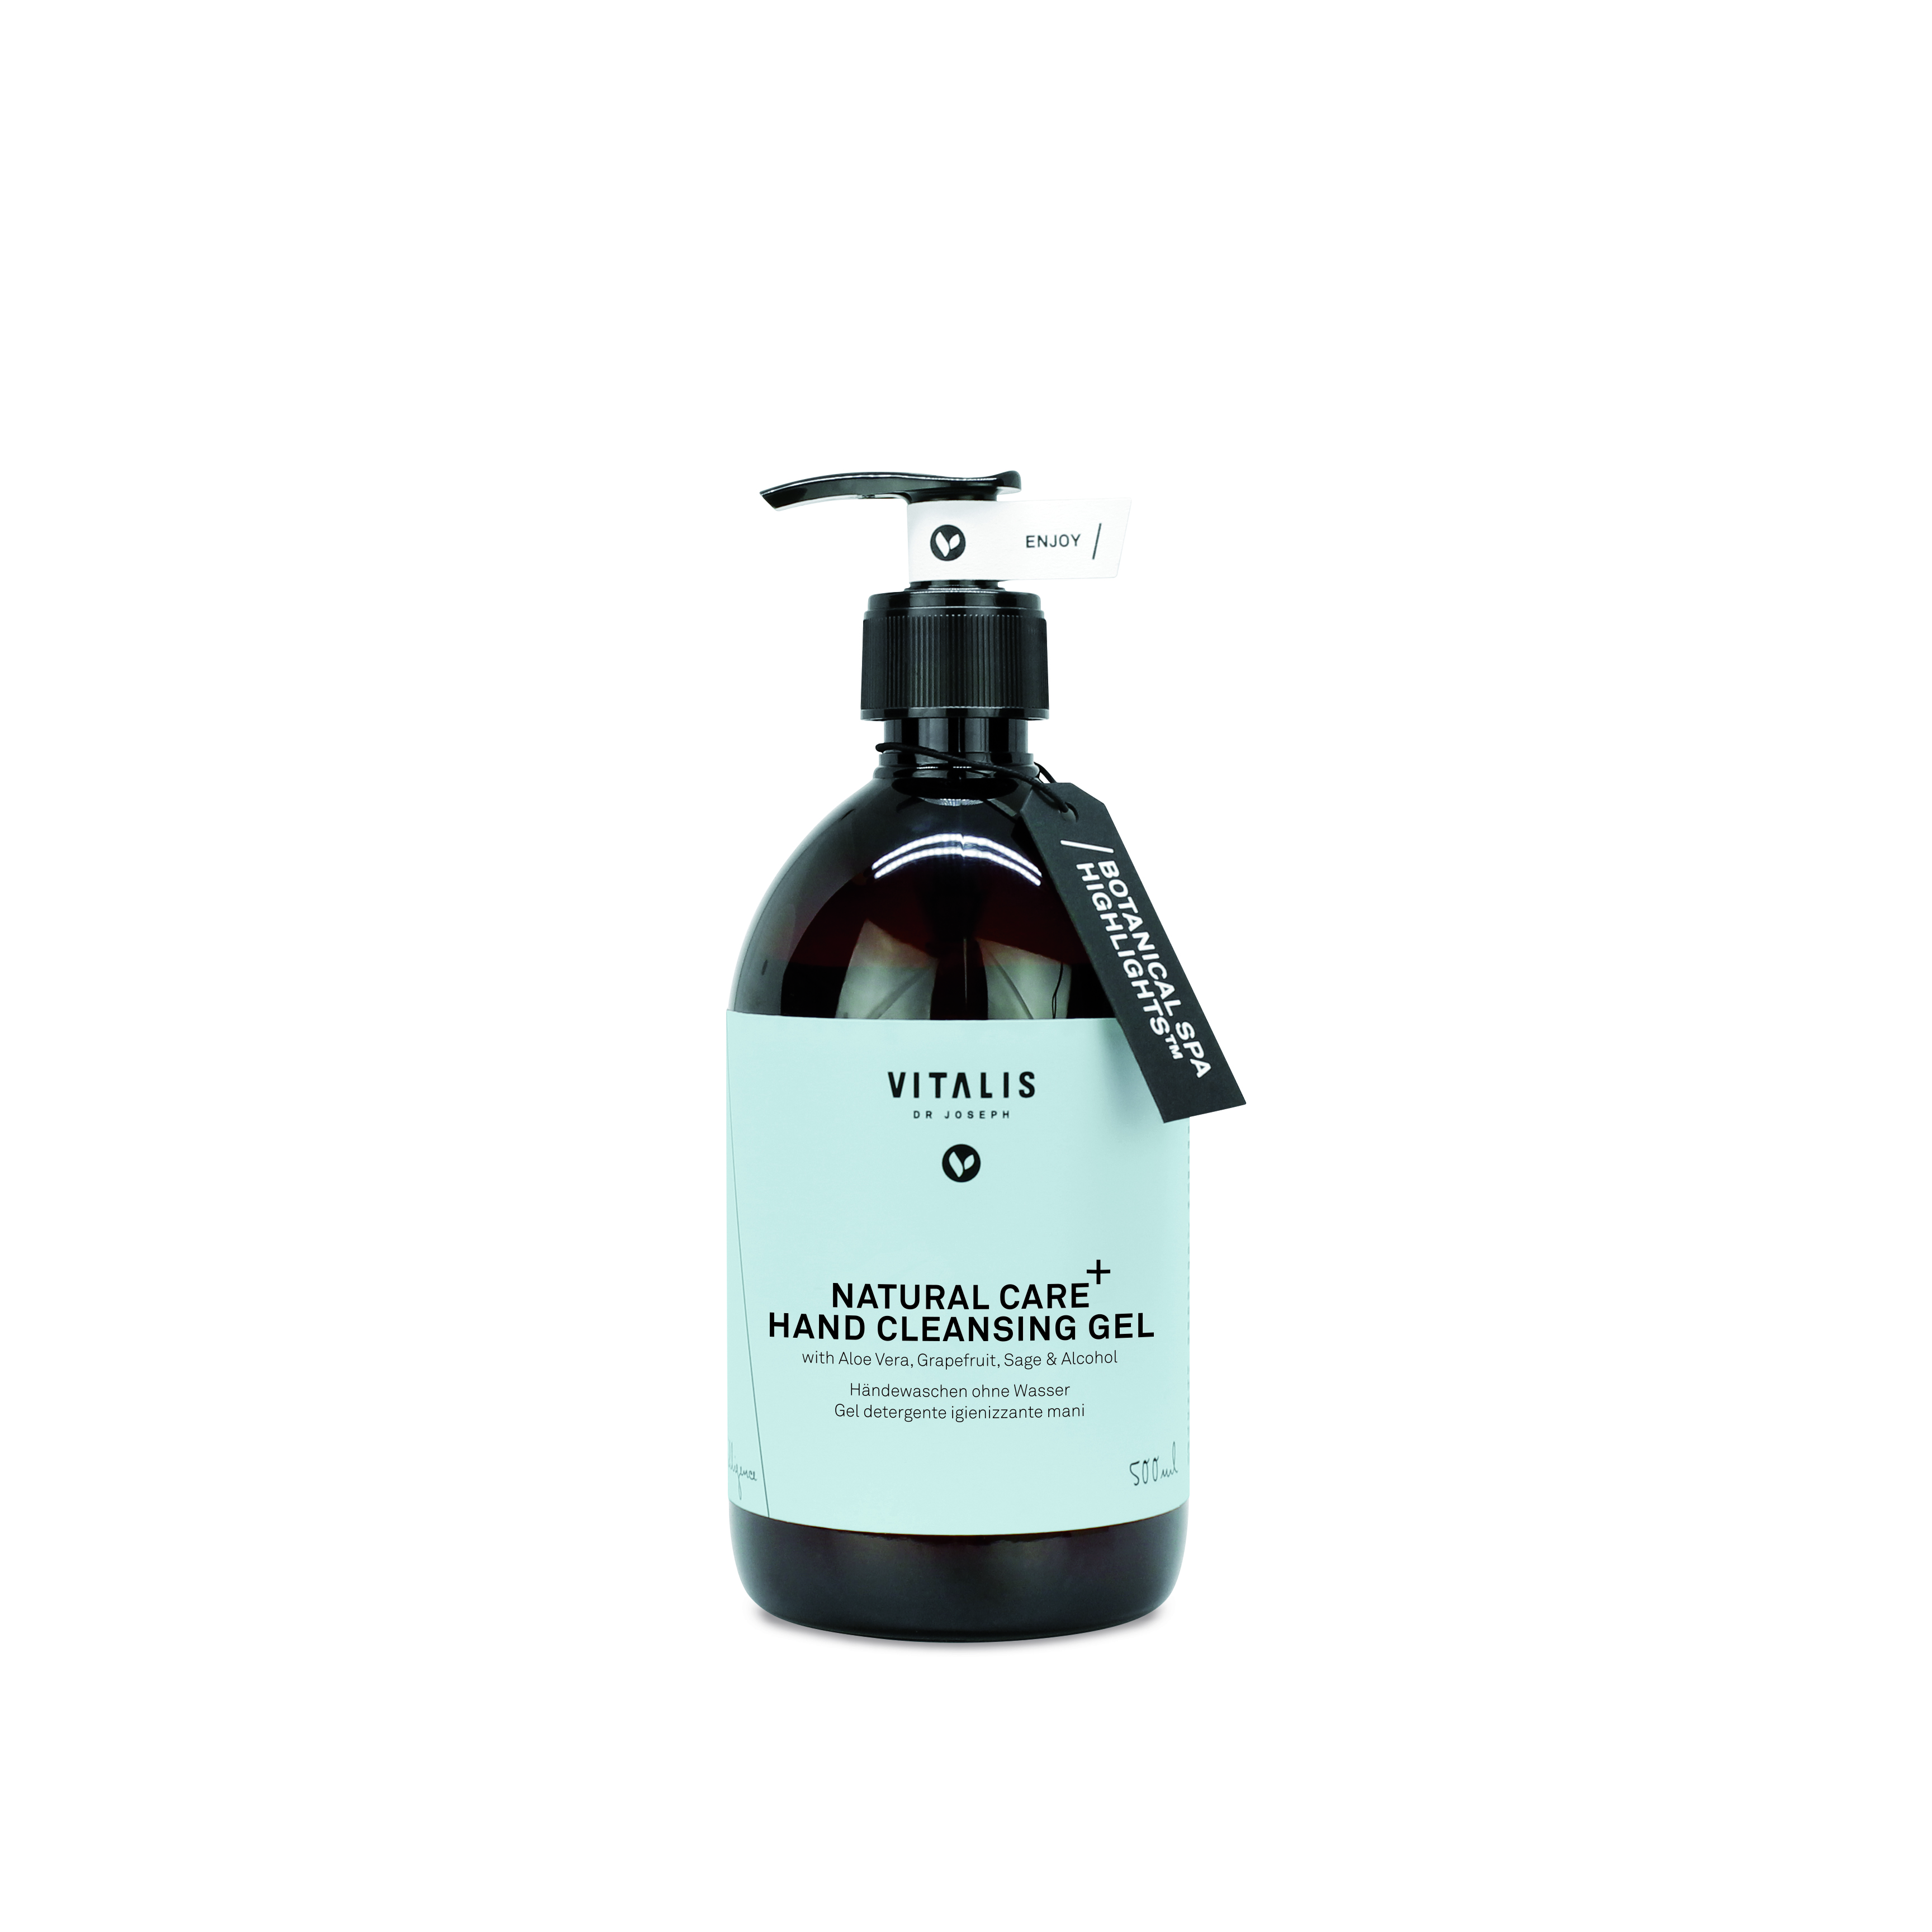 NATURAL CARE HAND CLEANSING GEL 250ml